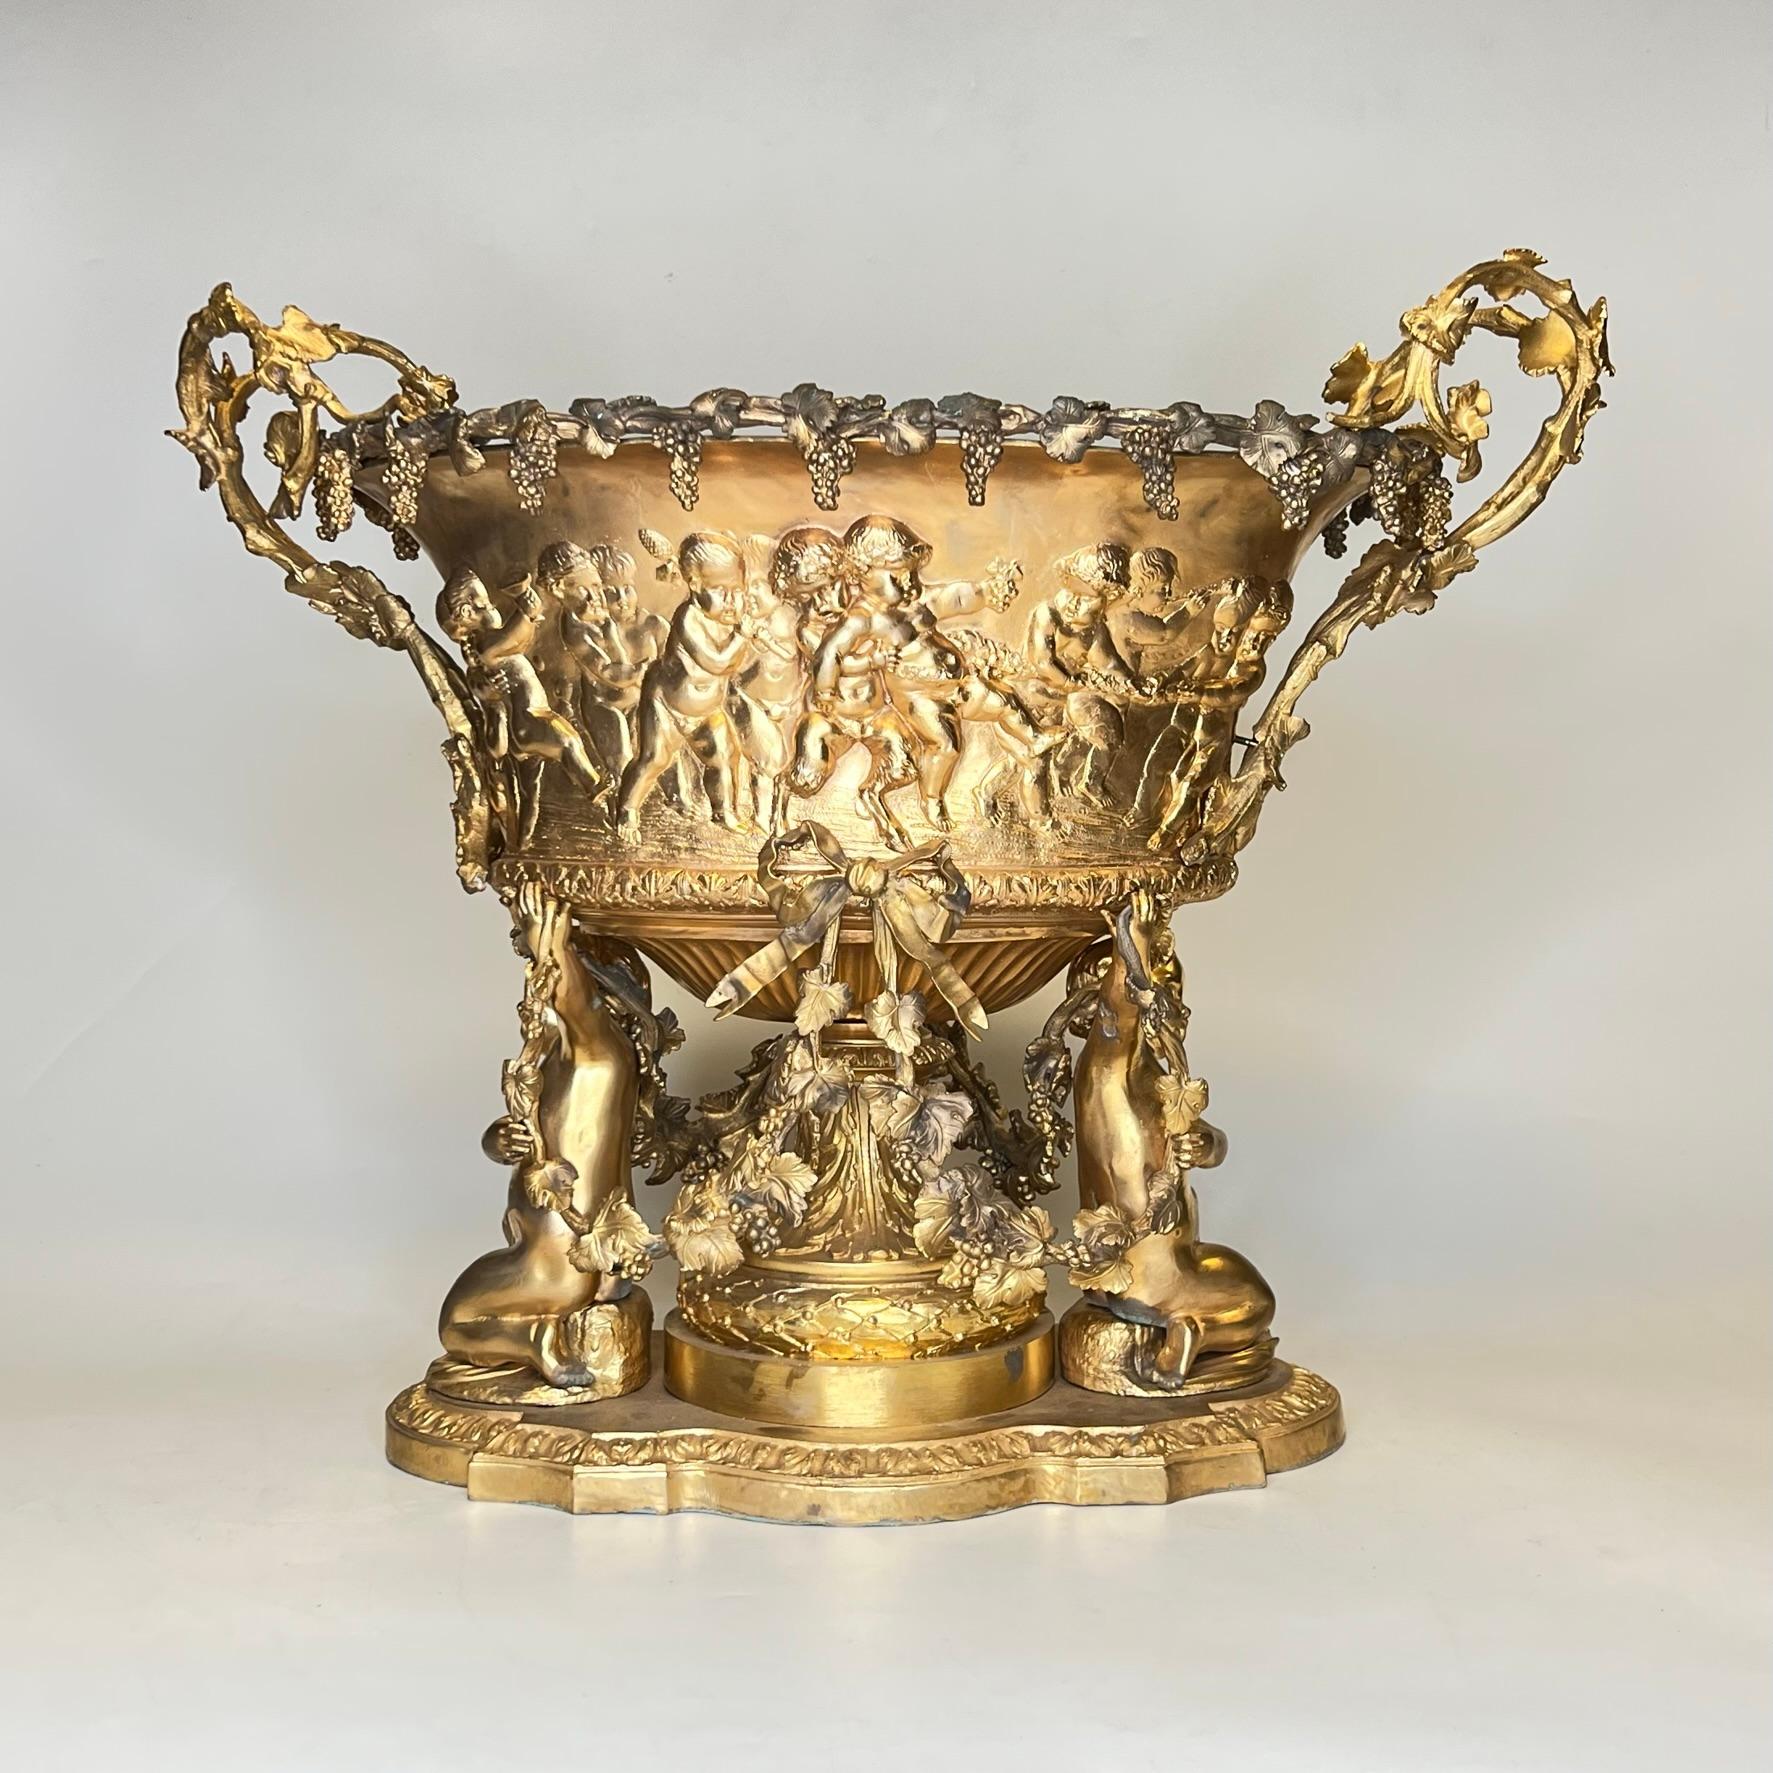 Neoclassical gilt bronze centerpiece or planter with Bacchus motif depicting frolicking cherubs (putti) in procession.  